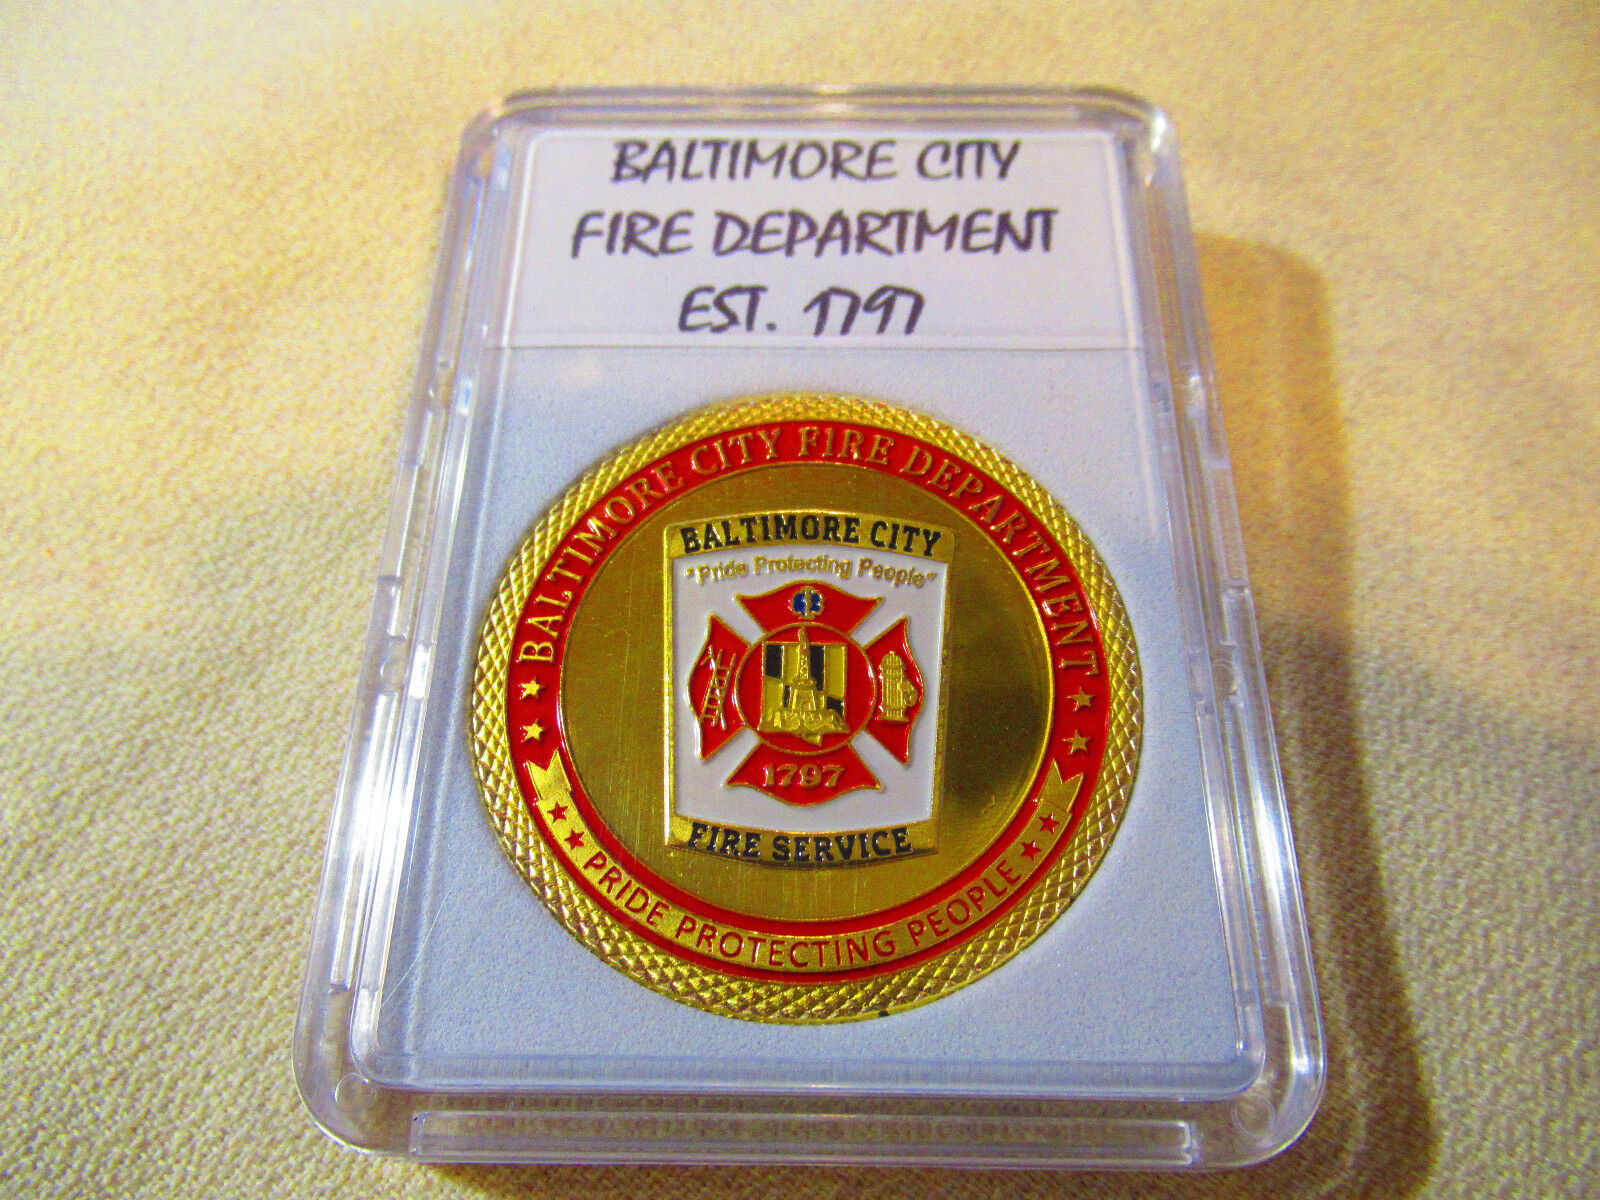 BALTIMORE CITY FIRE DEPT. Challenge Coin 